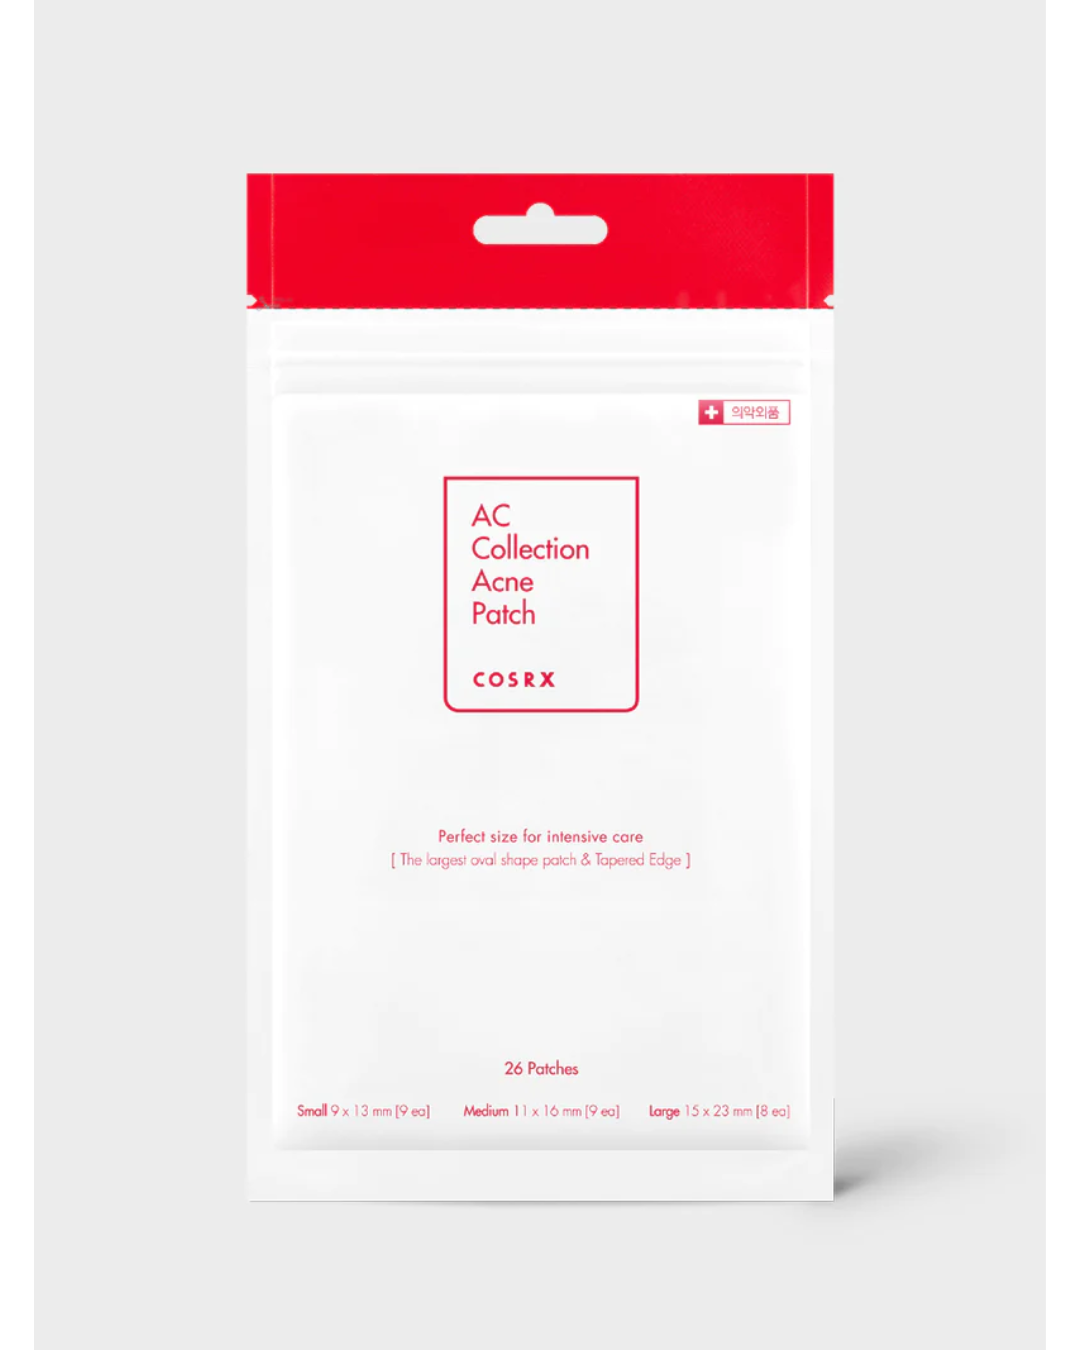 COSRX Ac Collection Acne Patch